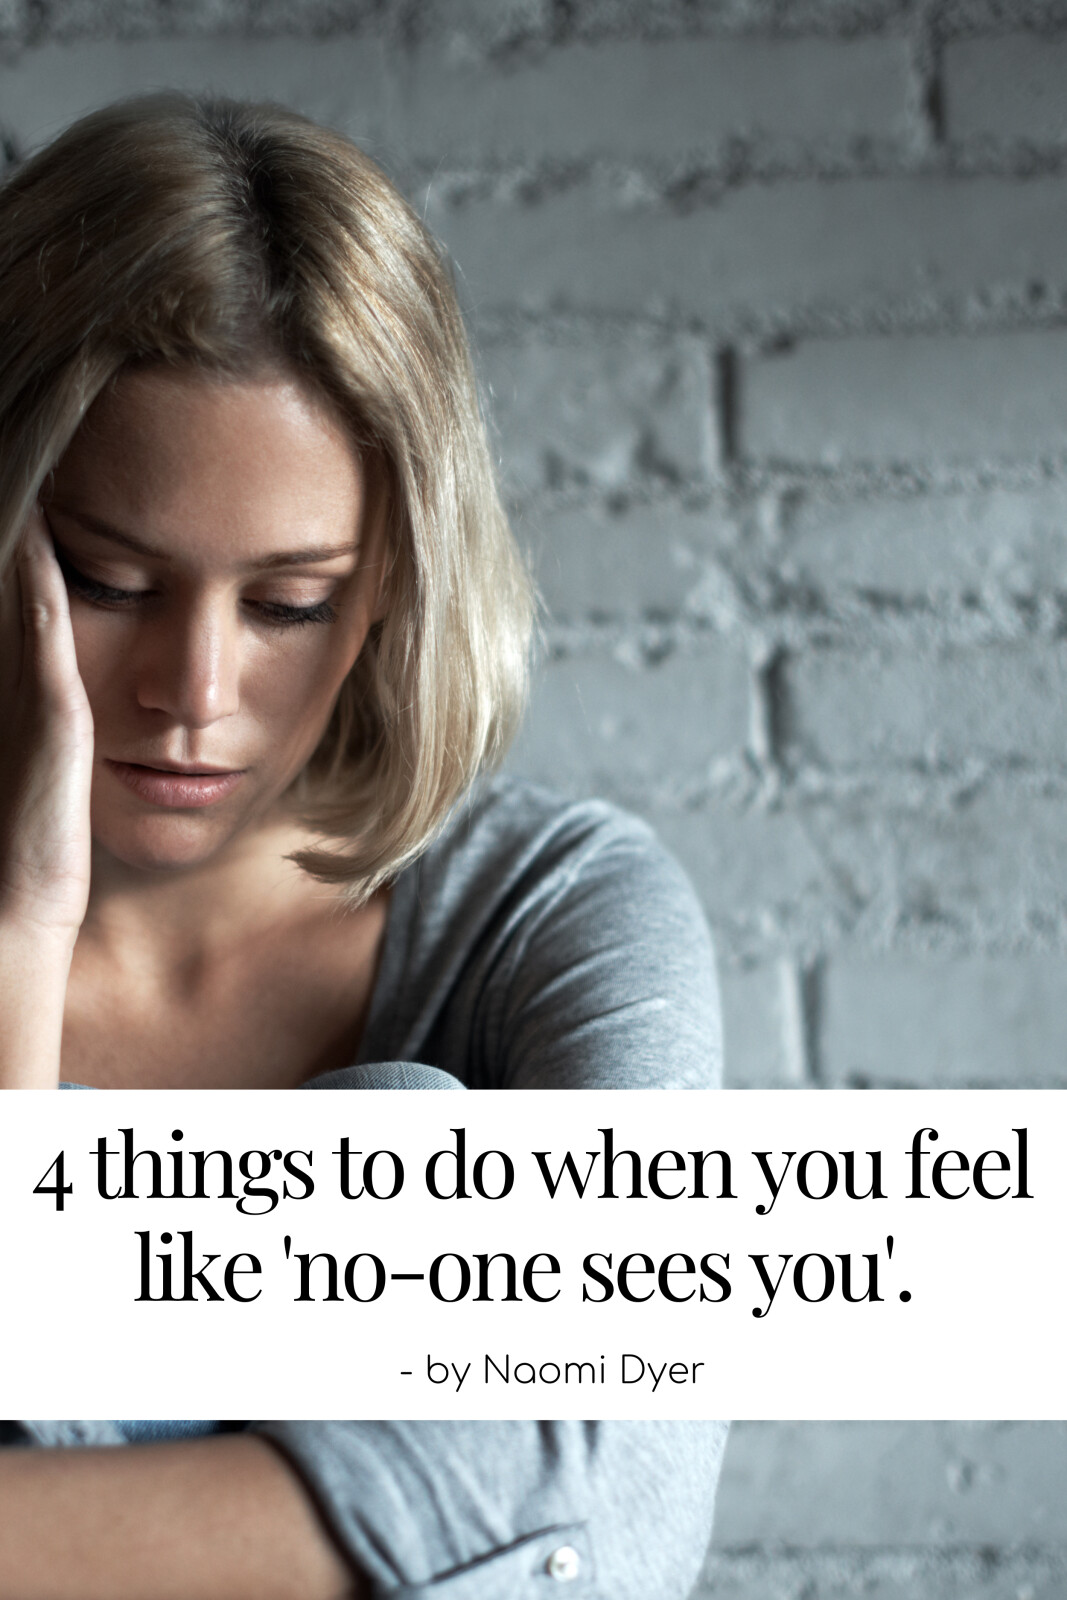 4 things to do when you feel like no-one sees you...